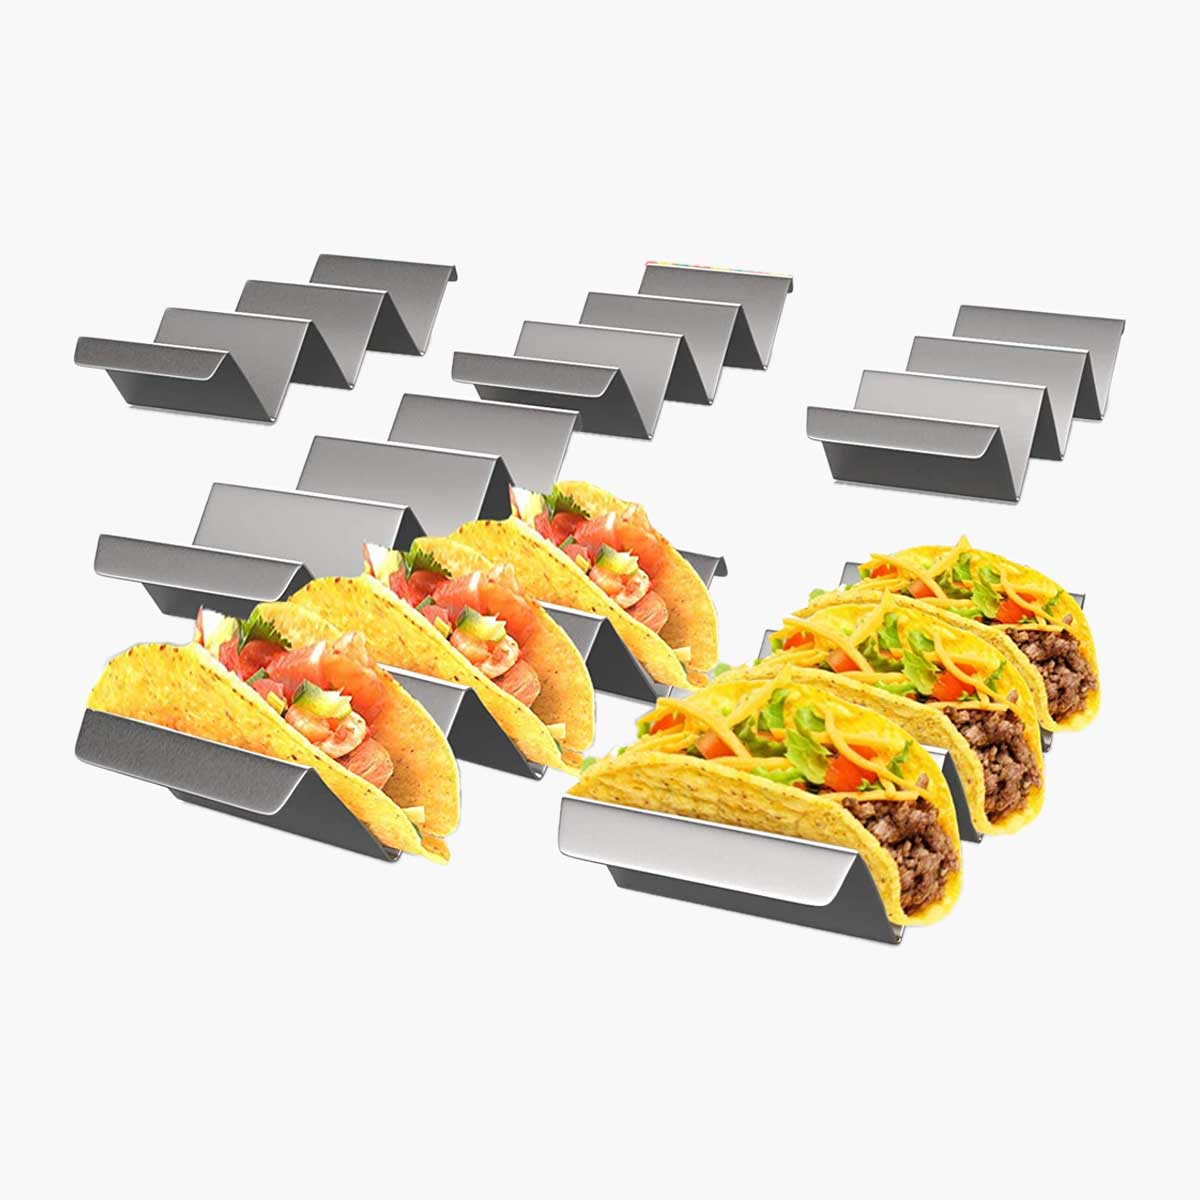 Metal taco stands, one of the items for everything you could possibly need for taco night at home.